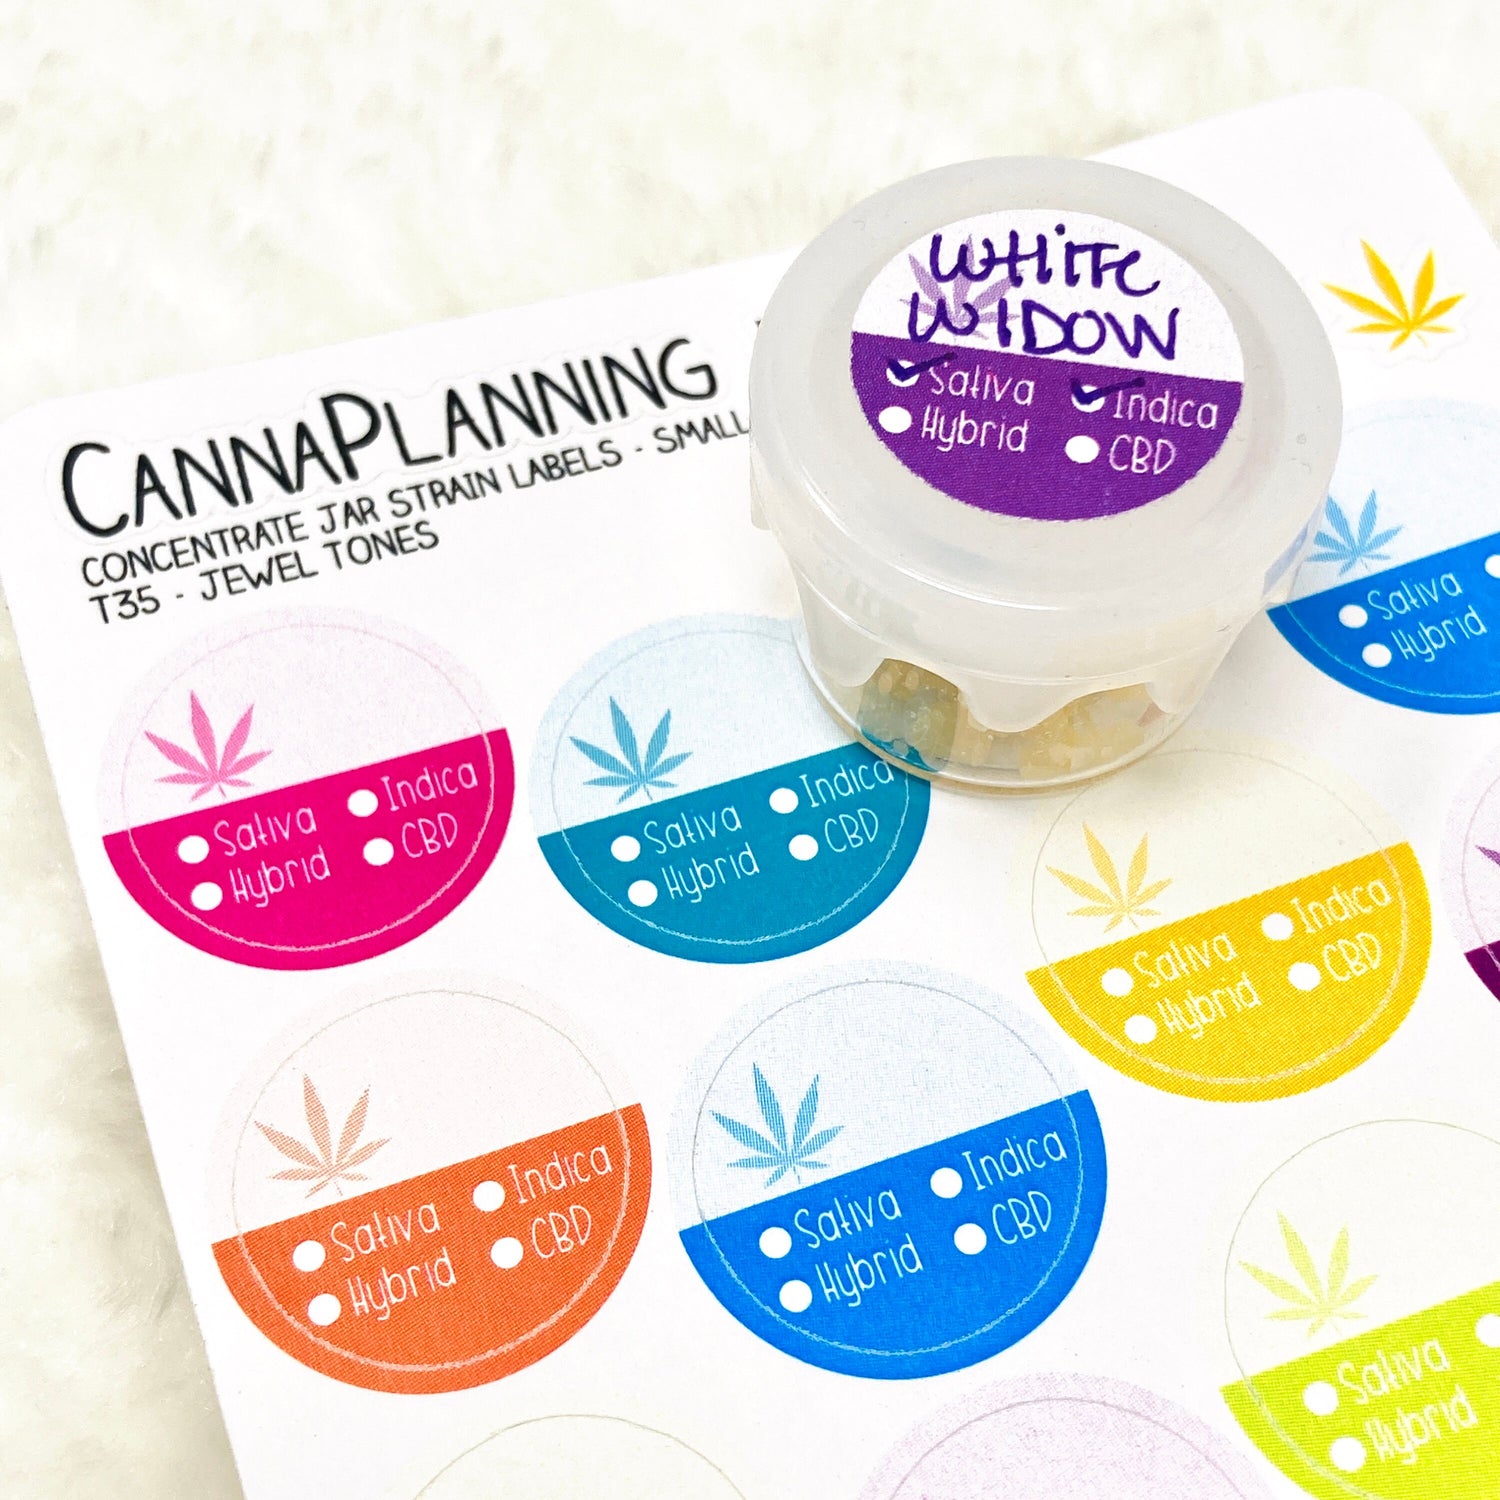 SMALL SIZE Concentrate Jar Strain Label stickers *Retiring PAPER stickers - final stock* | weed 420 edibles label cannabis warning